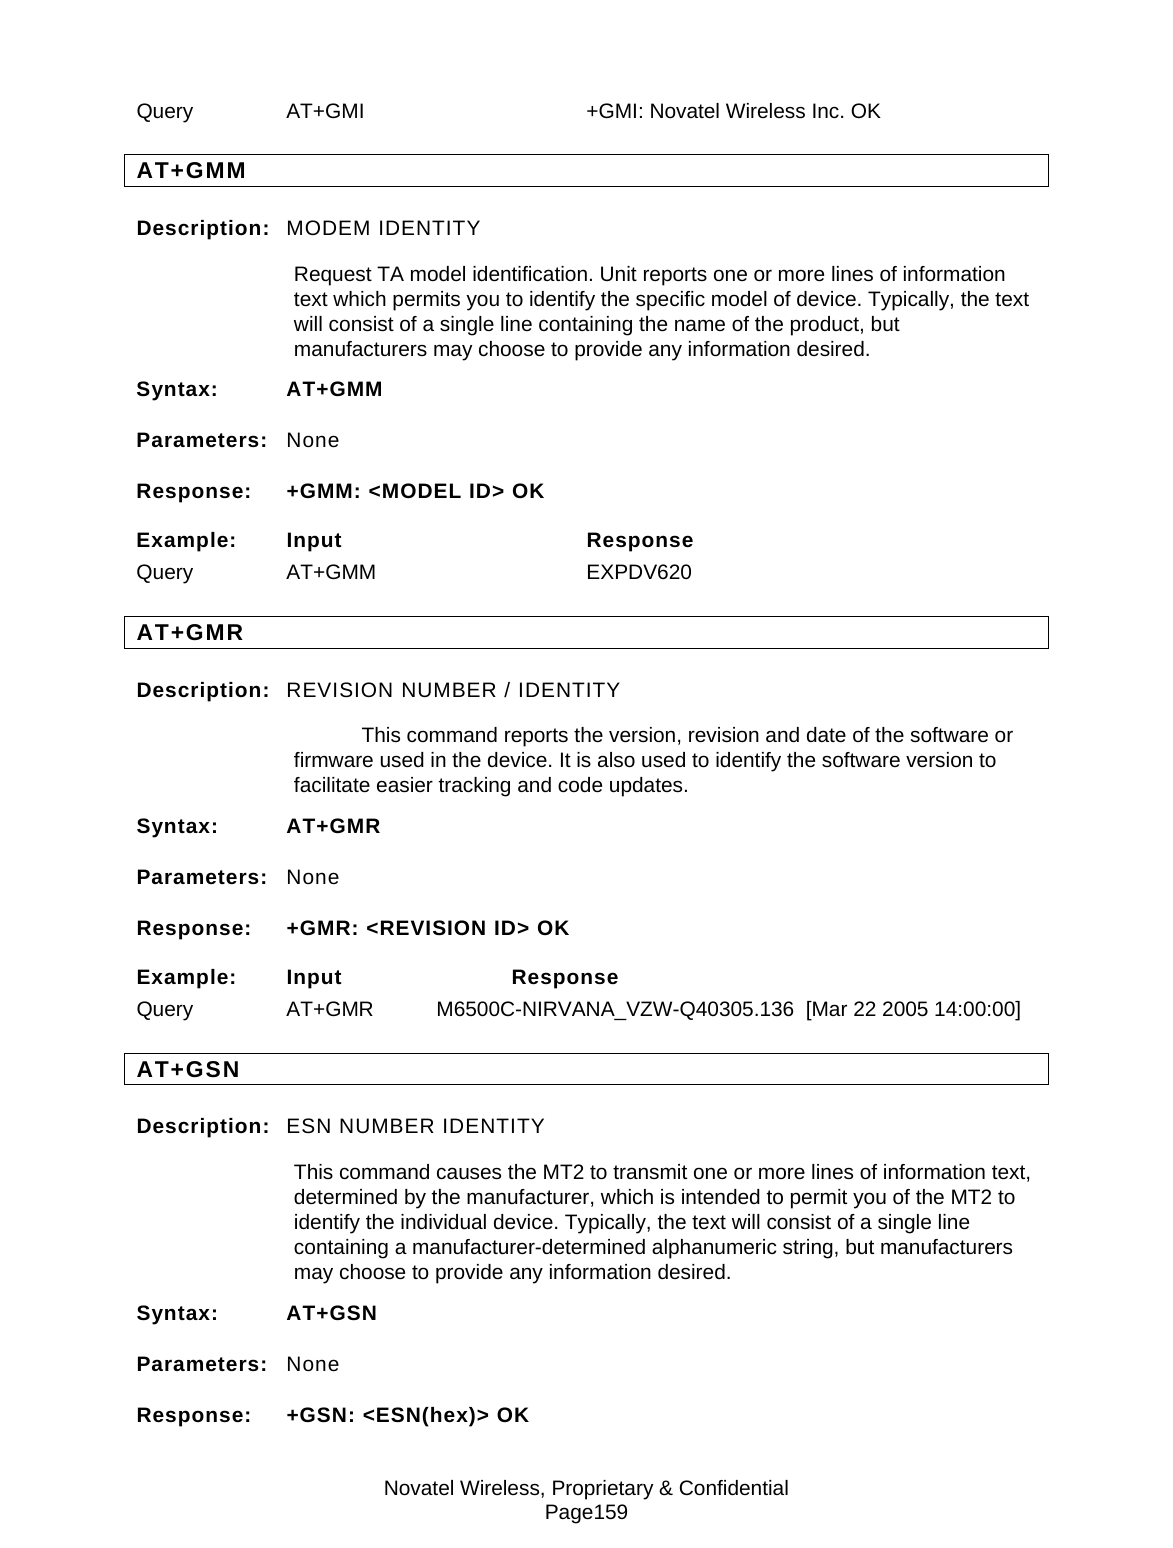 Novatel Wireless, Proprietary &amp; Confidential Page159 Query  AT+GMI    +GMI: Novatel Wireless Inc. OK AT+GMM Description:  MODEM IDENTITY Request TA model identification. Unit reports one or more lines of information text which permits you to identify the specific model of device. Typically, the text will consist of a single line containing the name of the product, but manufacturers may choose to provide any information desired. Syntax: AT+GMM Parameters:  None Response:  +GMM: &lt;MODEL ID&gt; OK Example: Input  Response    Query AT+GMM   EXPDV620 AT+GMR Description:  REVISION NUMBER / IDENTITY   This command reports the version, revision and date of the software or firmware used in the device. It is also used to identify the software version to facilitate easier tracking and code updates. Syntax: AT+GMR Parameters:  None Response:  +GMR: &lt;REVISION ID&gt; OK Example: Input  Response     Query  AT+GMR  M6500C-NIRVANA_VZW-Q40305.136  [Mar 22 2005 14:00:00] AT+GSN Description:  ESN NUMBER IDENTITY This command causes the MT2 to transmit one or more lines of information text, determined by the manufacturer, which is intended to permit you of the MT2 to identify the individual device. Typically, the text will consist of a single line containing a manufacturer-determined alphanumeric string, but manufacturers may choose to provide any information desired. Syntax: AT+GSN Parameters:  None Response:  +GSN: &lt;ESN(hex)&gt; OK 